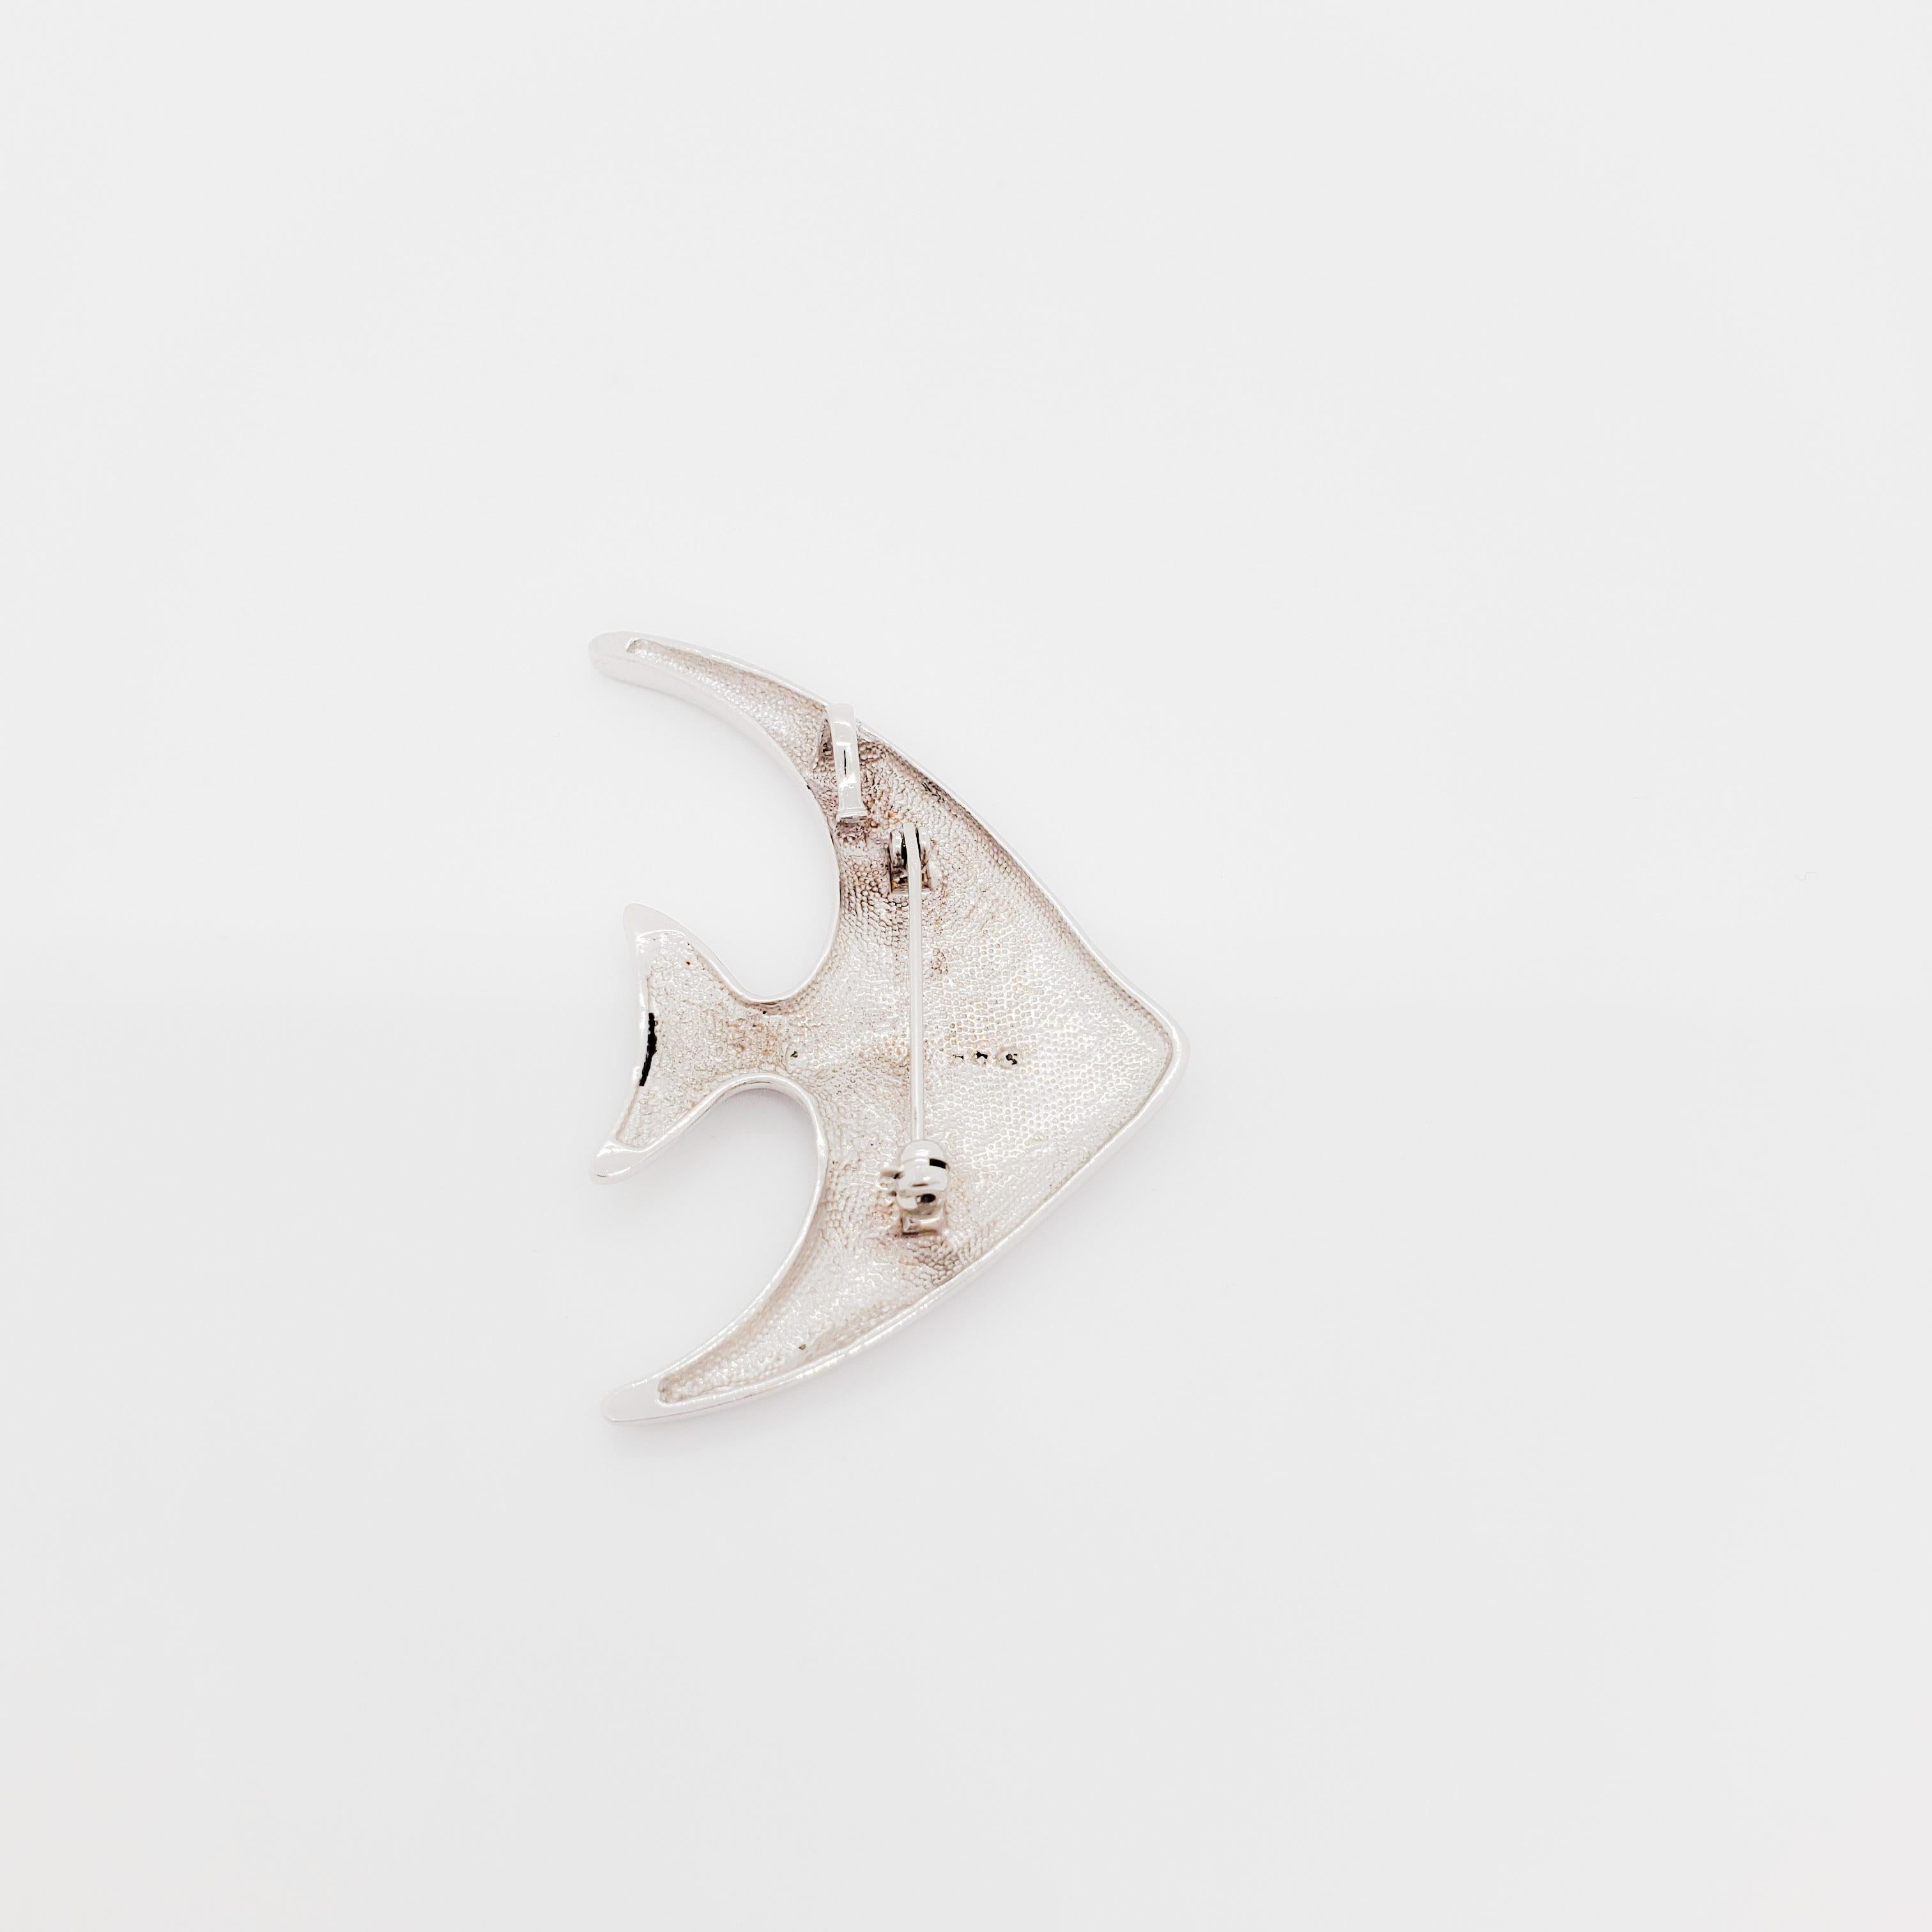 Very unique tropical fish pendant/brooch handmade in 14k white gold.  This piece has 1.00 ct. of good quality, white, and bright diamond rounds.